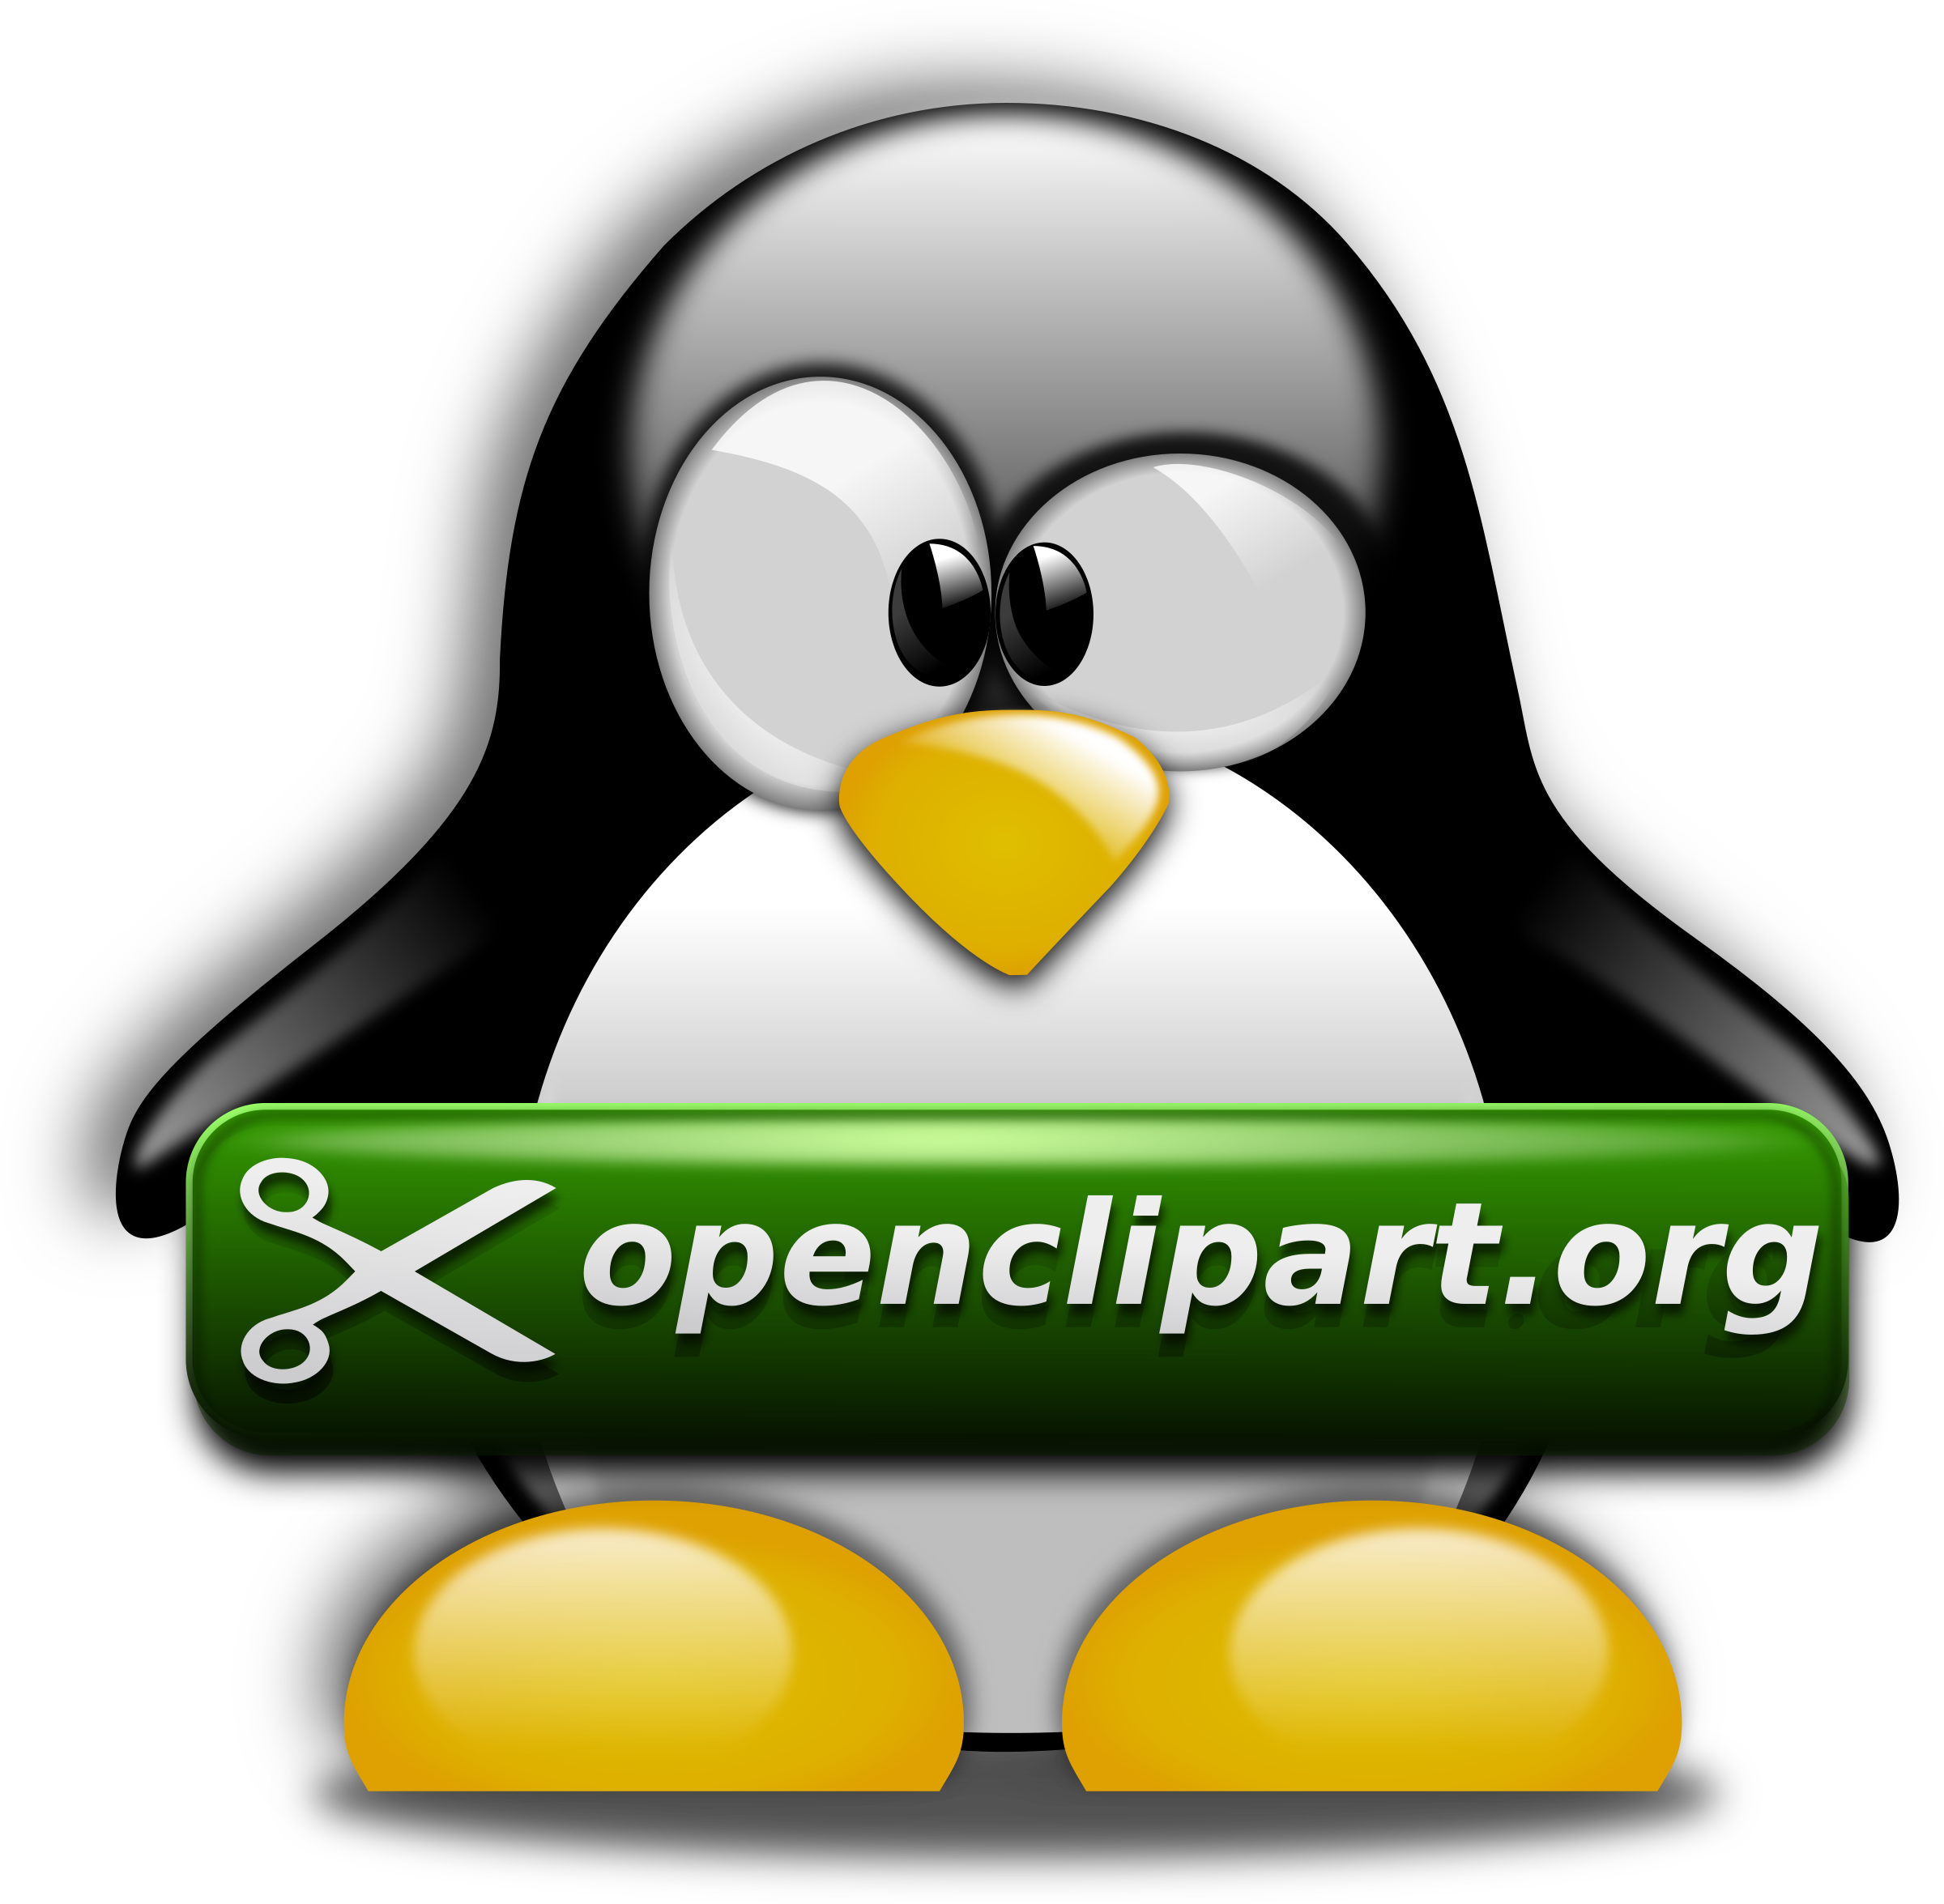 Tux openclipart dot org. Hippo clipart mouth open